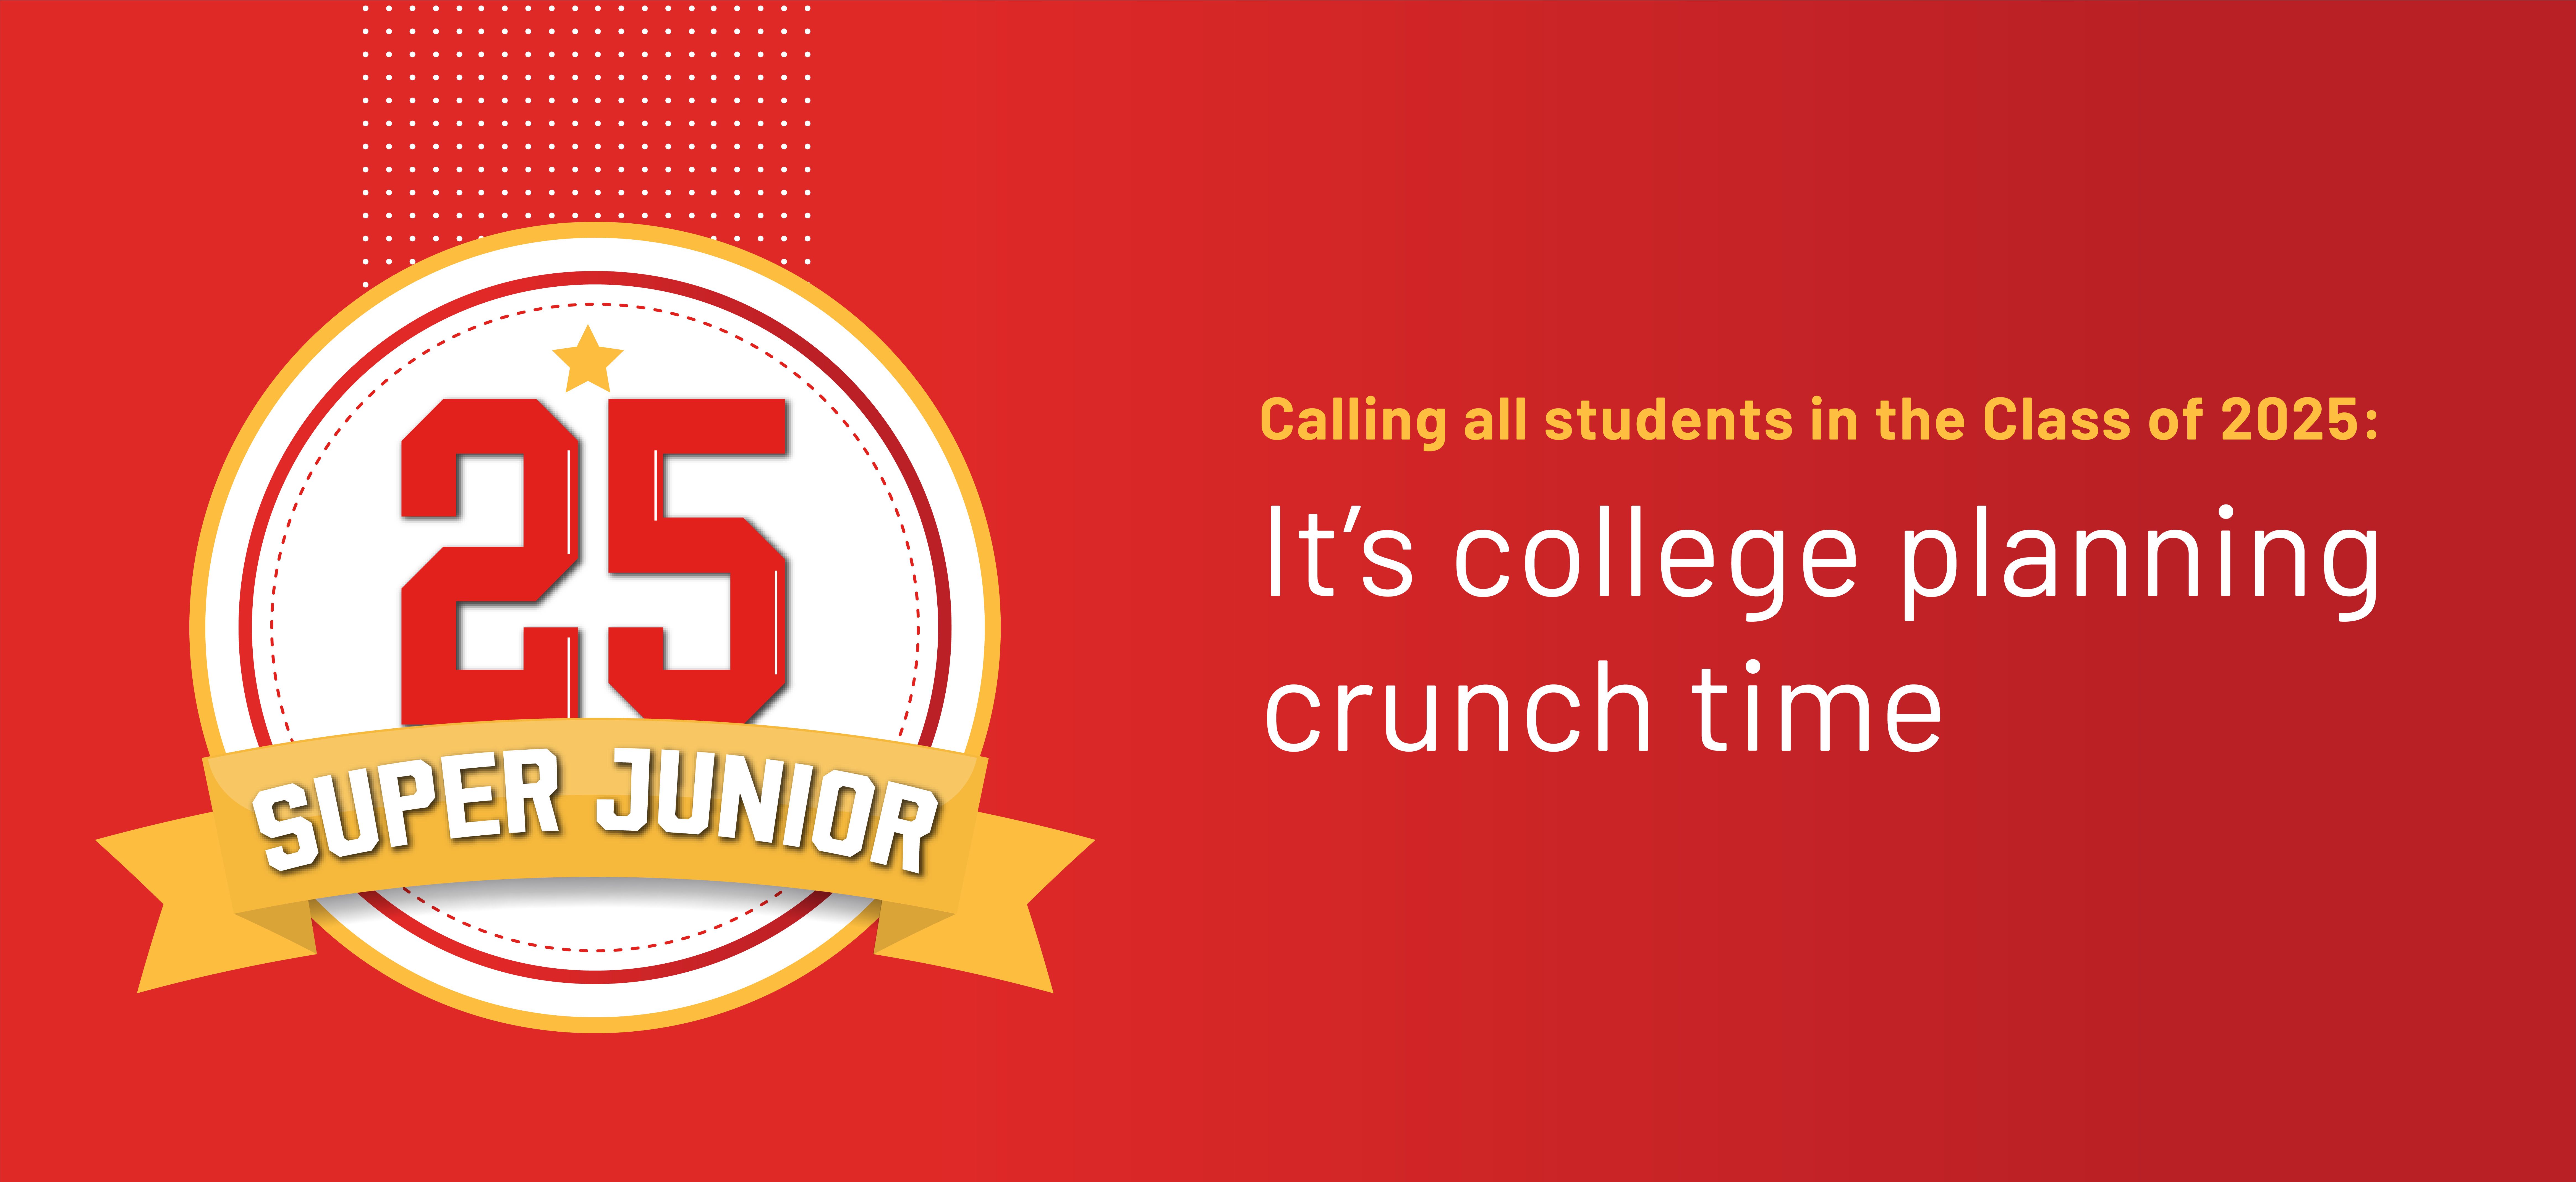 Calling All Super Juniors: It’s College Planning Crunch Time!